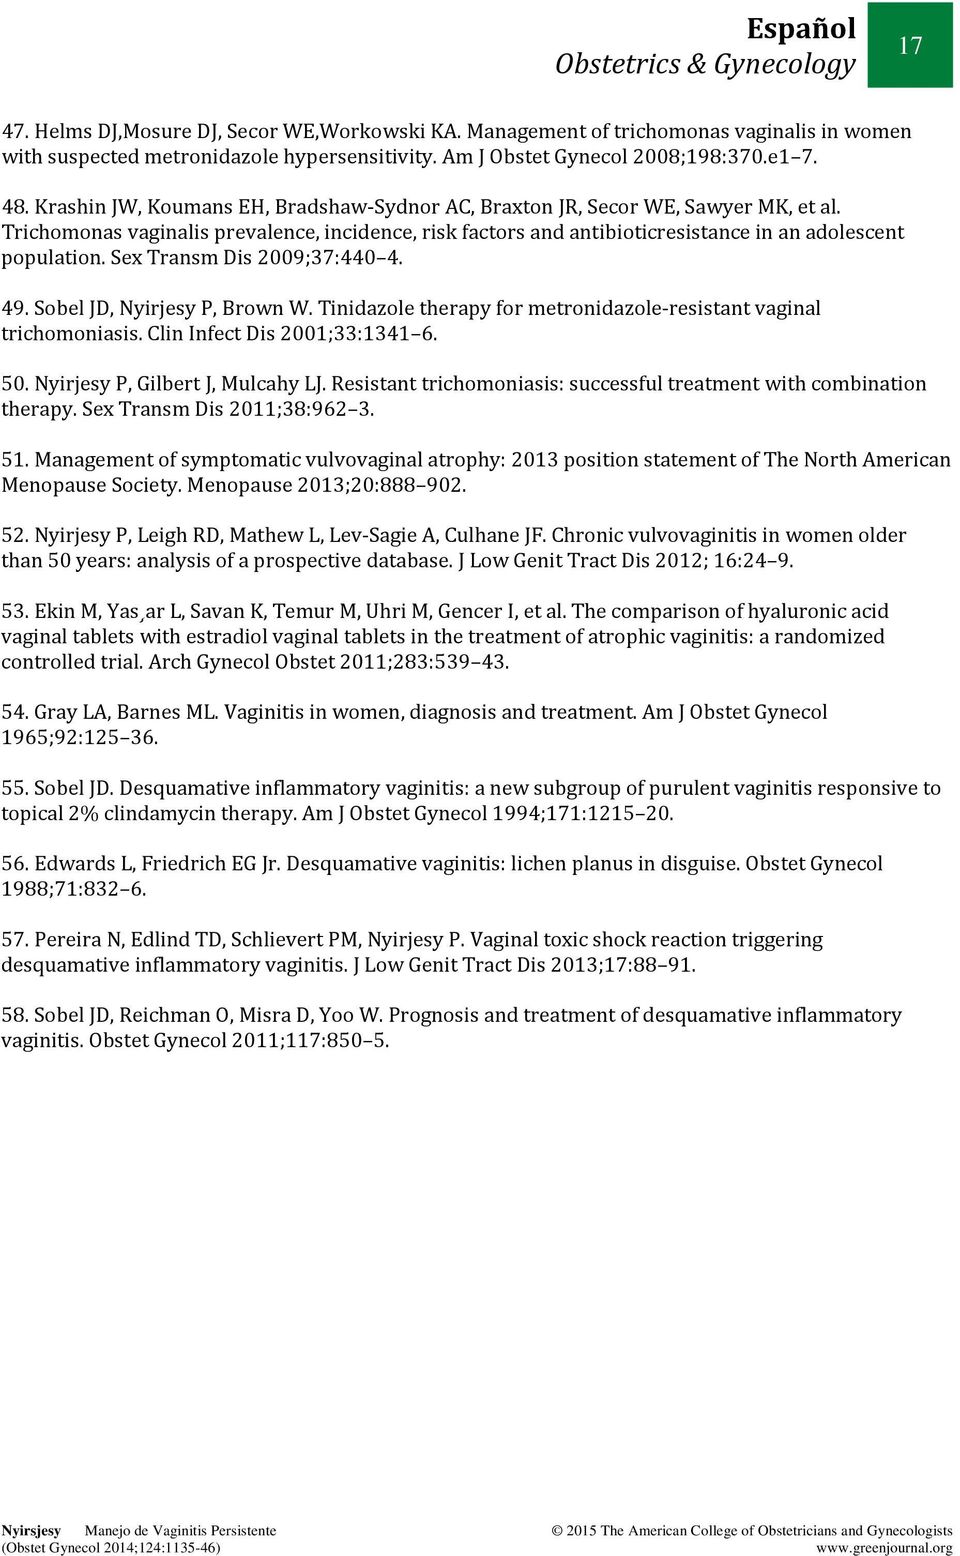 Sex Transm Dis 2009;37:440 4. 49. Sobel JD, Nyirjesy P, Brown W. Tinidazole therapy for metronidazole-resistant vaginal trichomoniasis. Clin Infect Dis 2001;33:1341 6. 50.